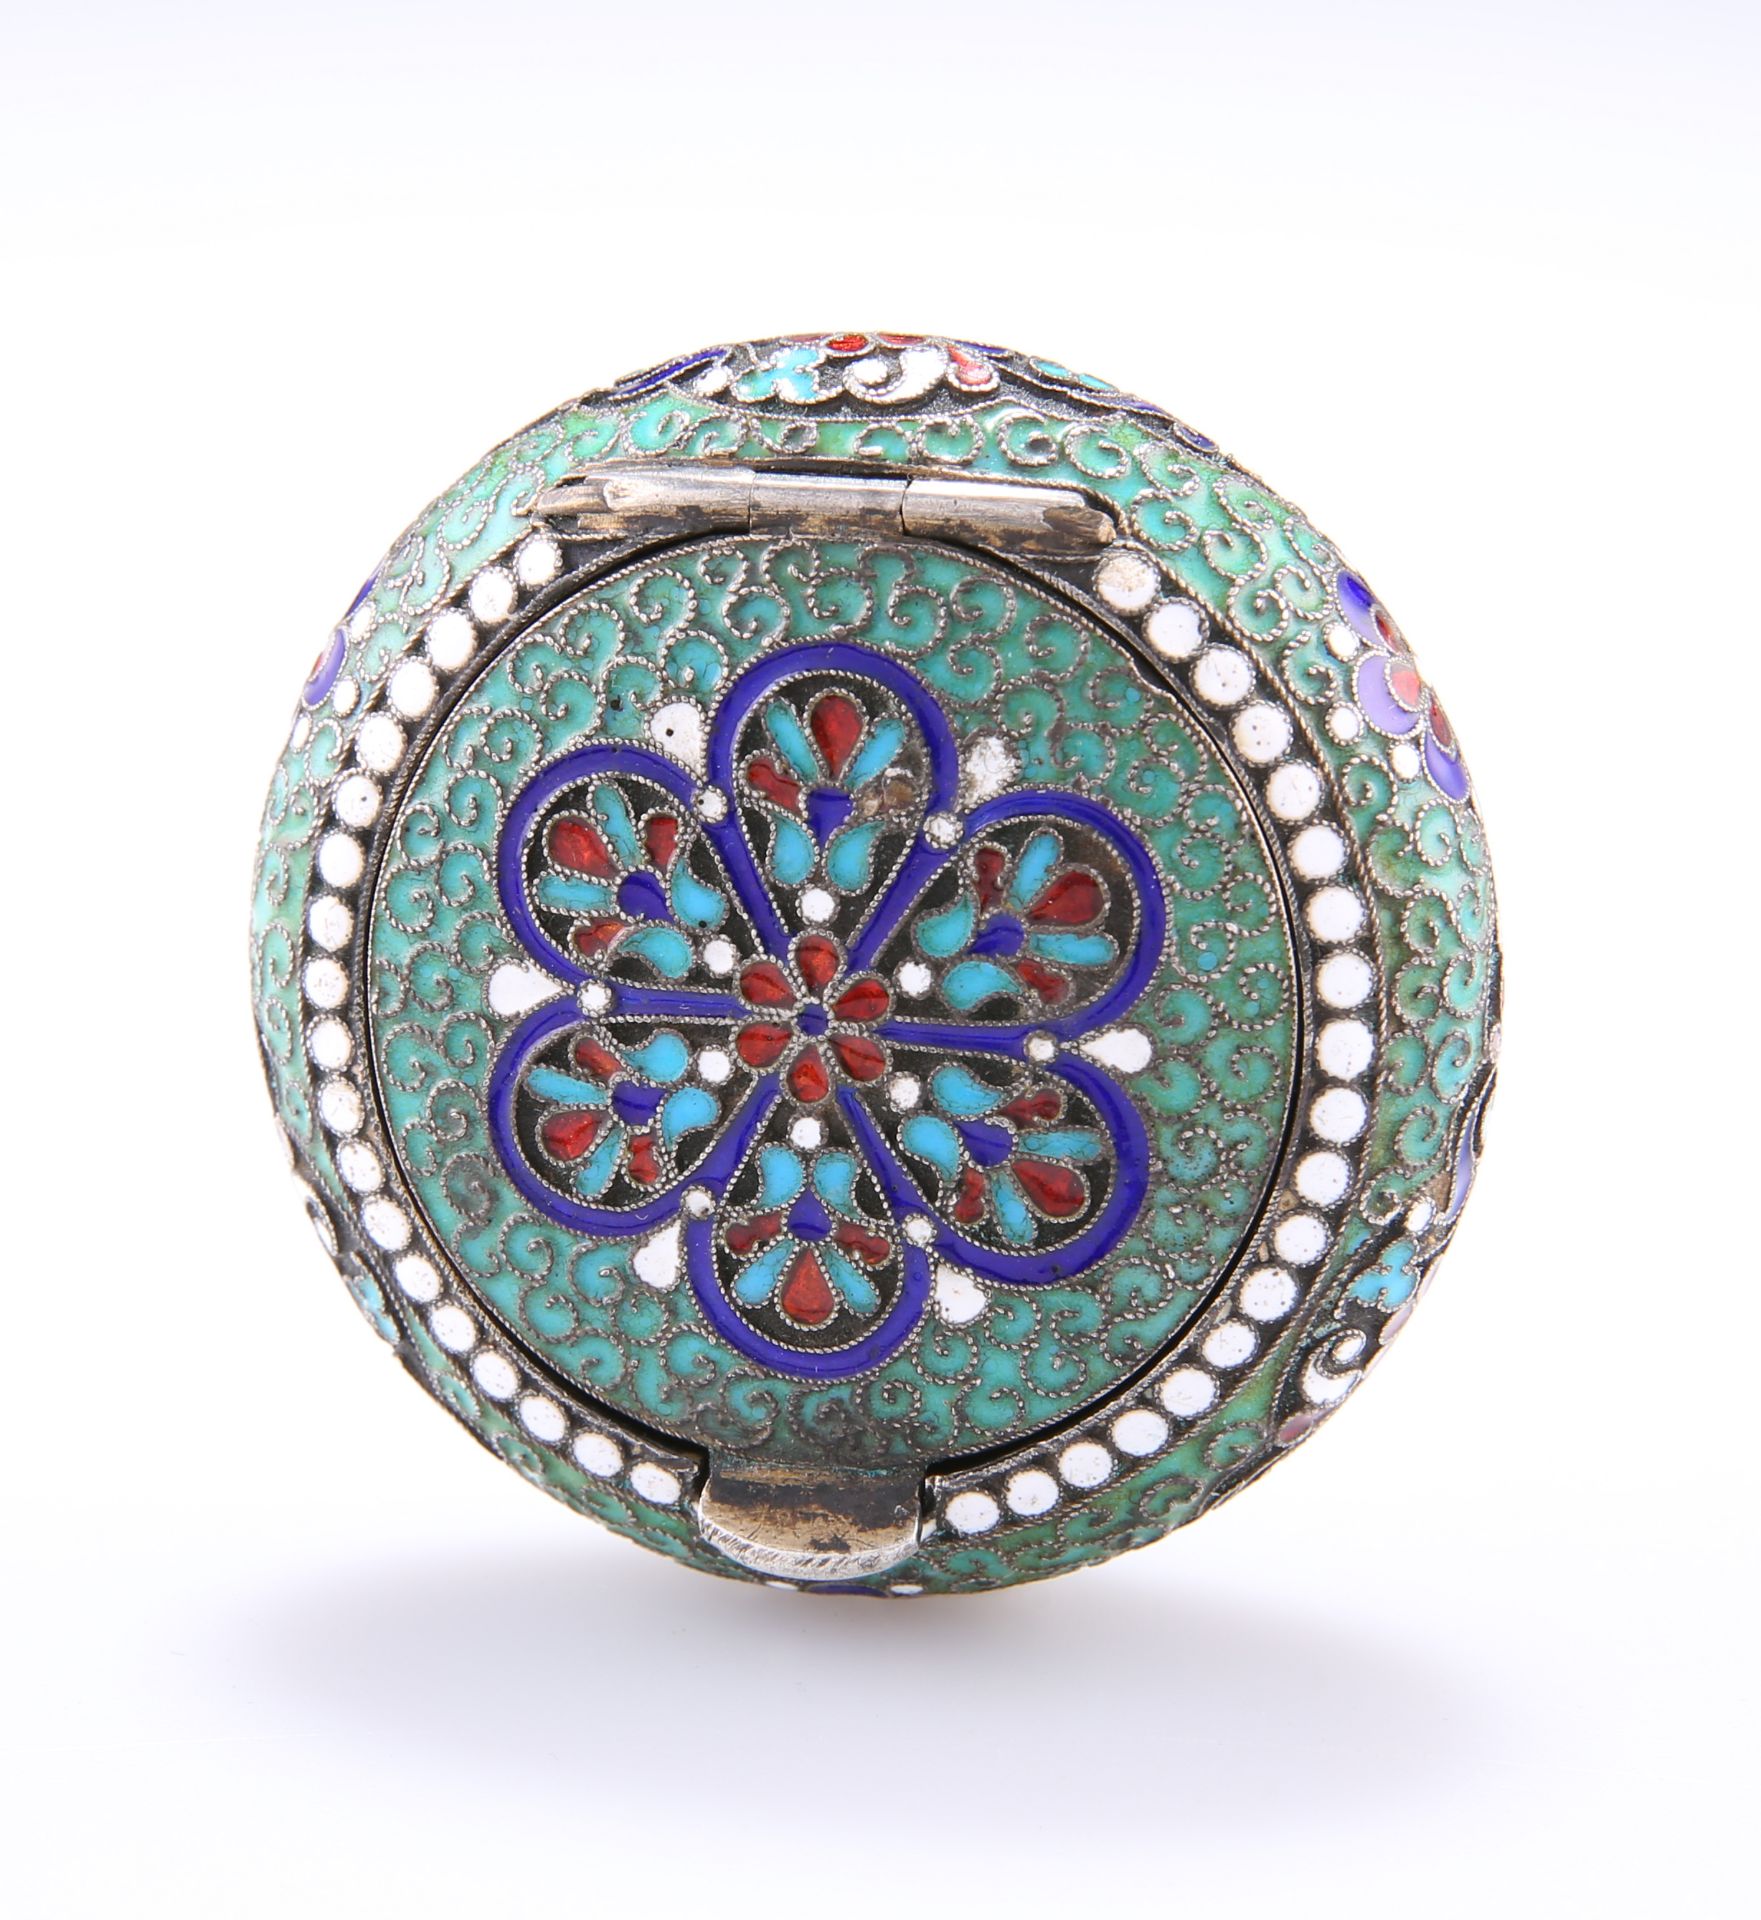 A RUSSIAN SILVER AND ENAMEL PILL BOX